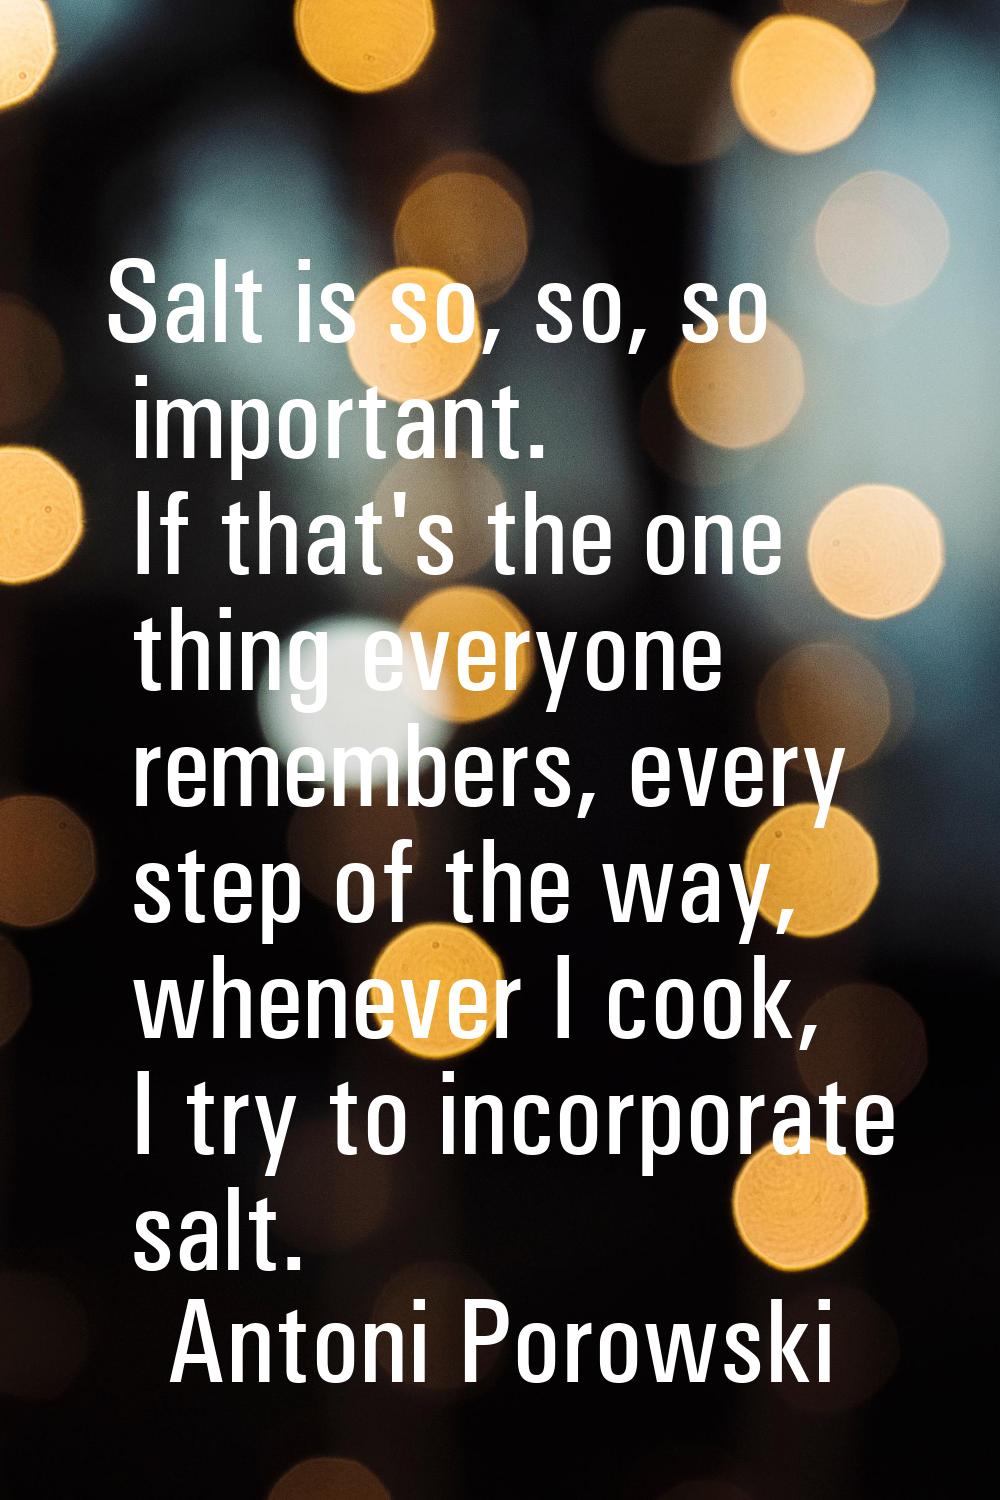 Salt is so, so, so important. If that's the one thing everyone remembers, every step of the way, wh